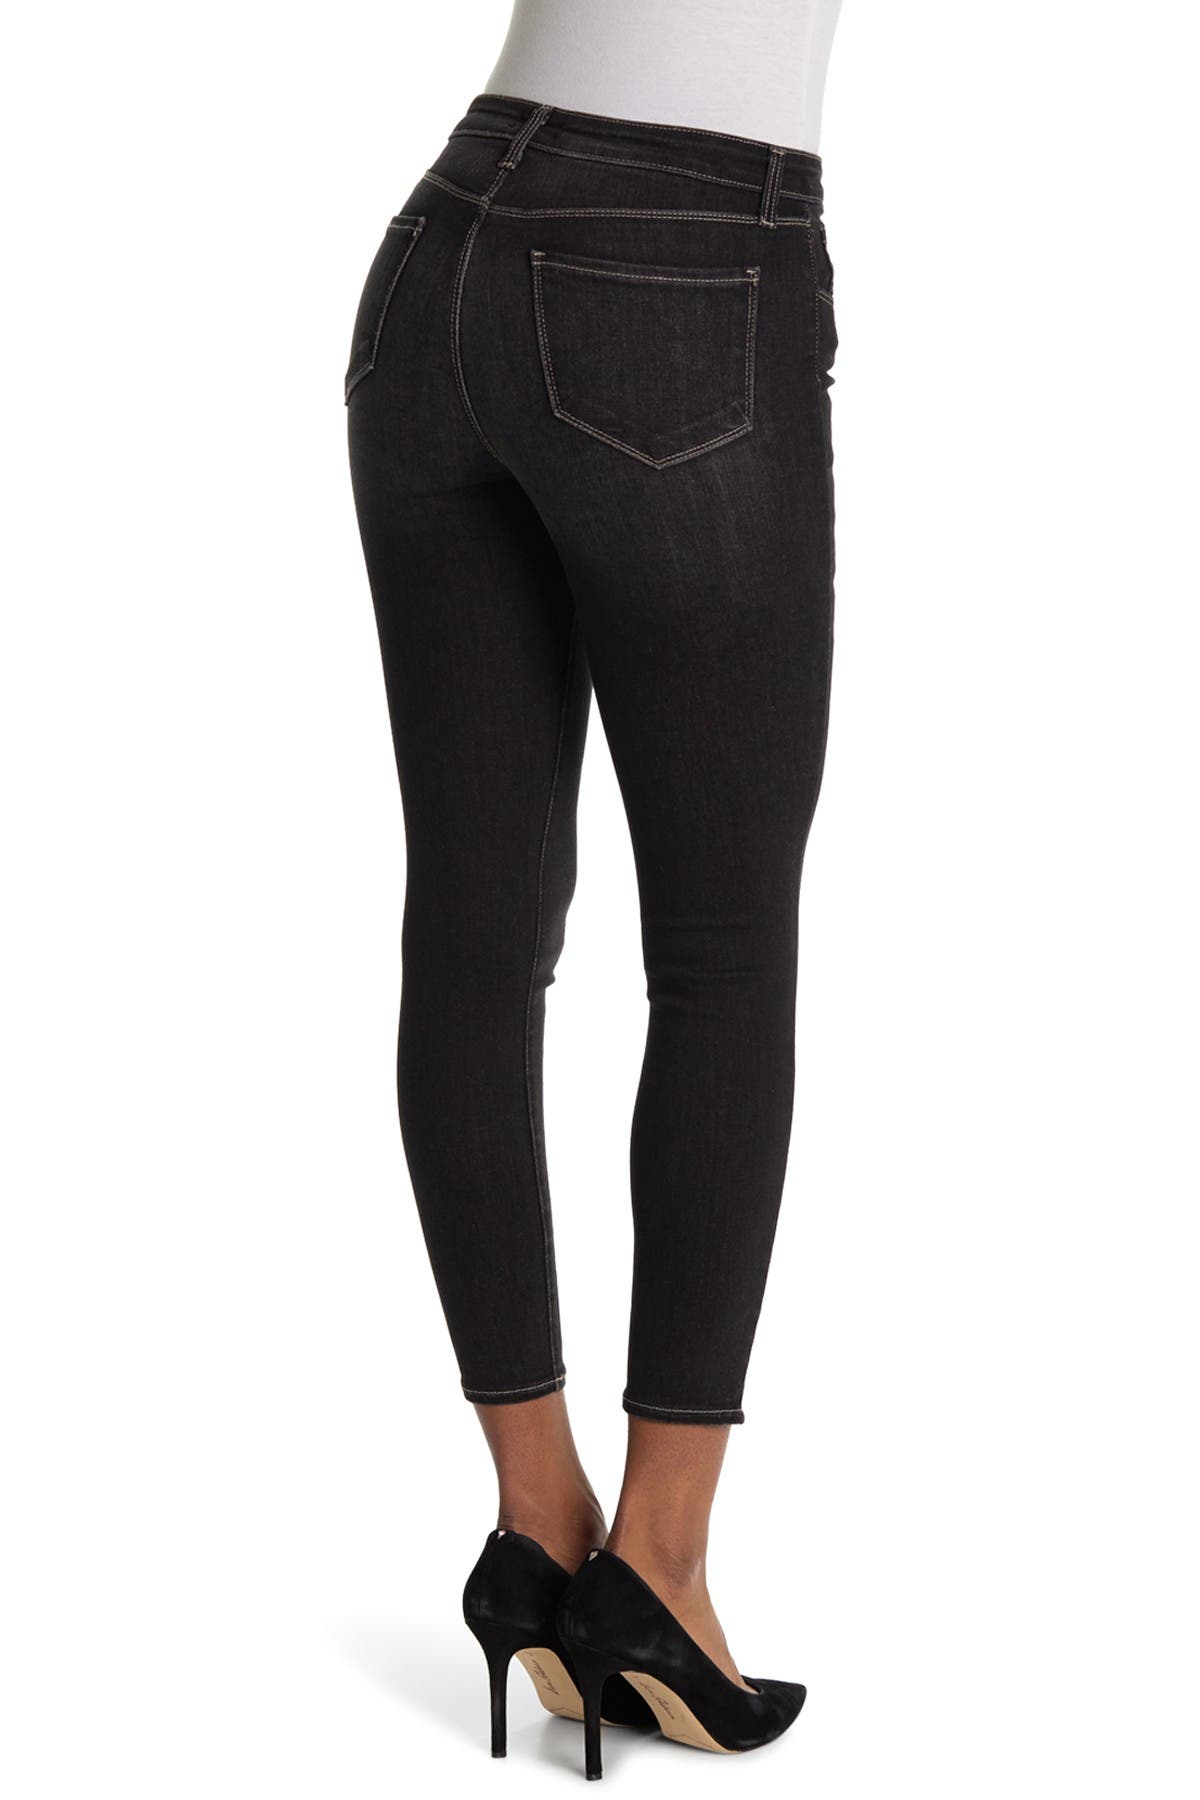 L Agence Margot High Waisted Ankle Skinny Jeans In Black